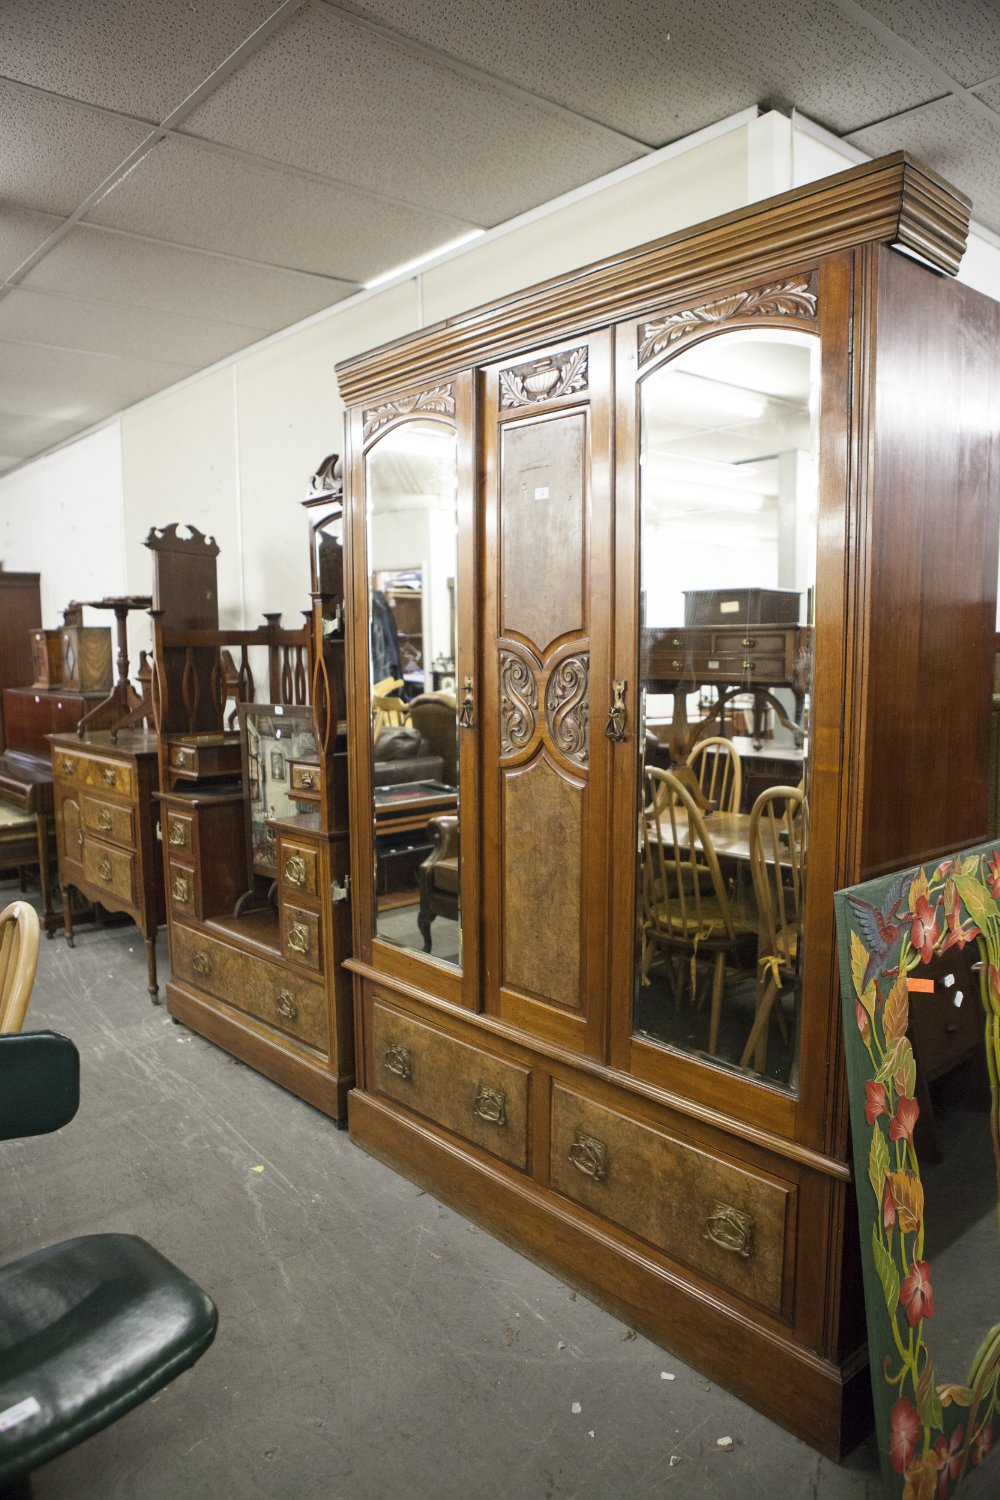 A VICTORIAN BEDROOM SUITE OF THREE PIECES VIZ, A TRIPLE WARDROBE WITH MIRRORS TO EACH DOOR, TWO